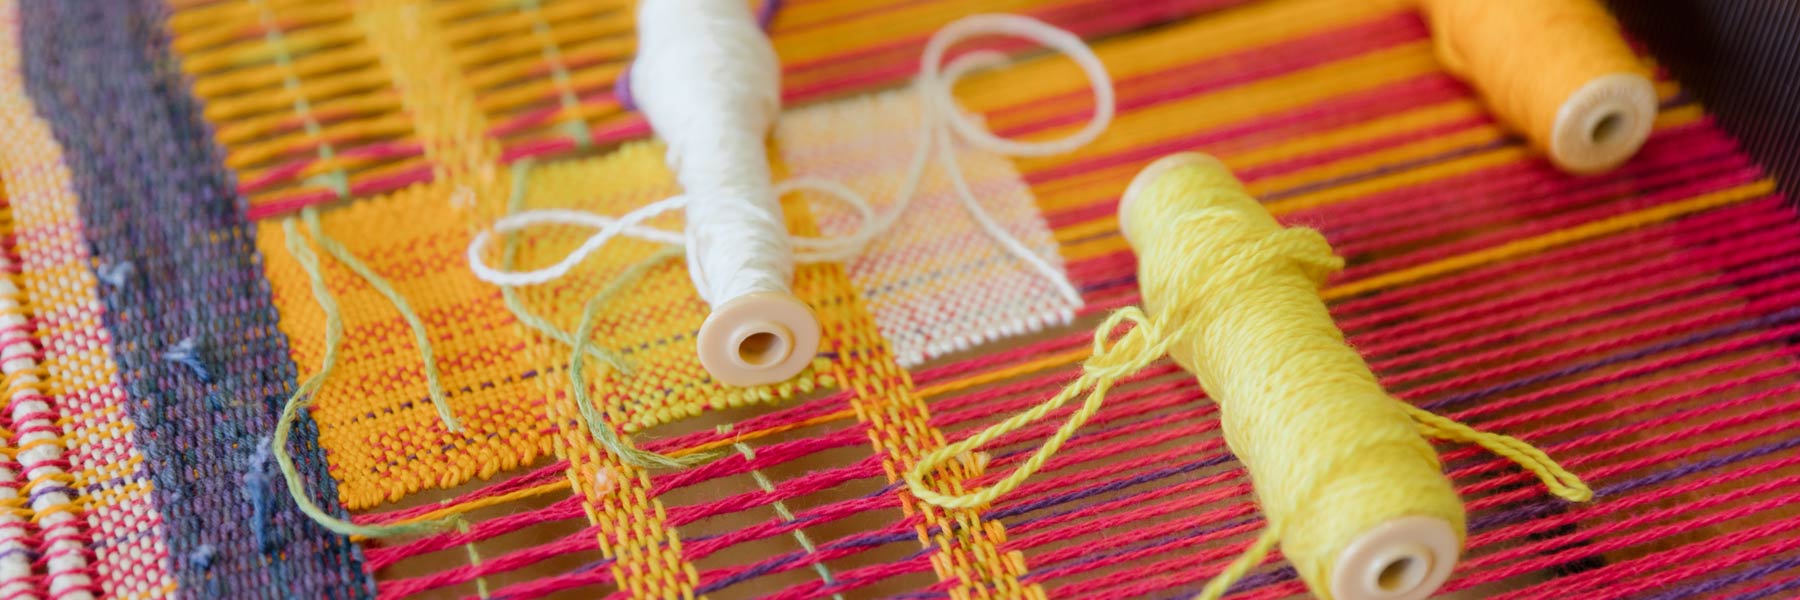 Yarn being woven into fabric on a loom.